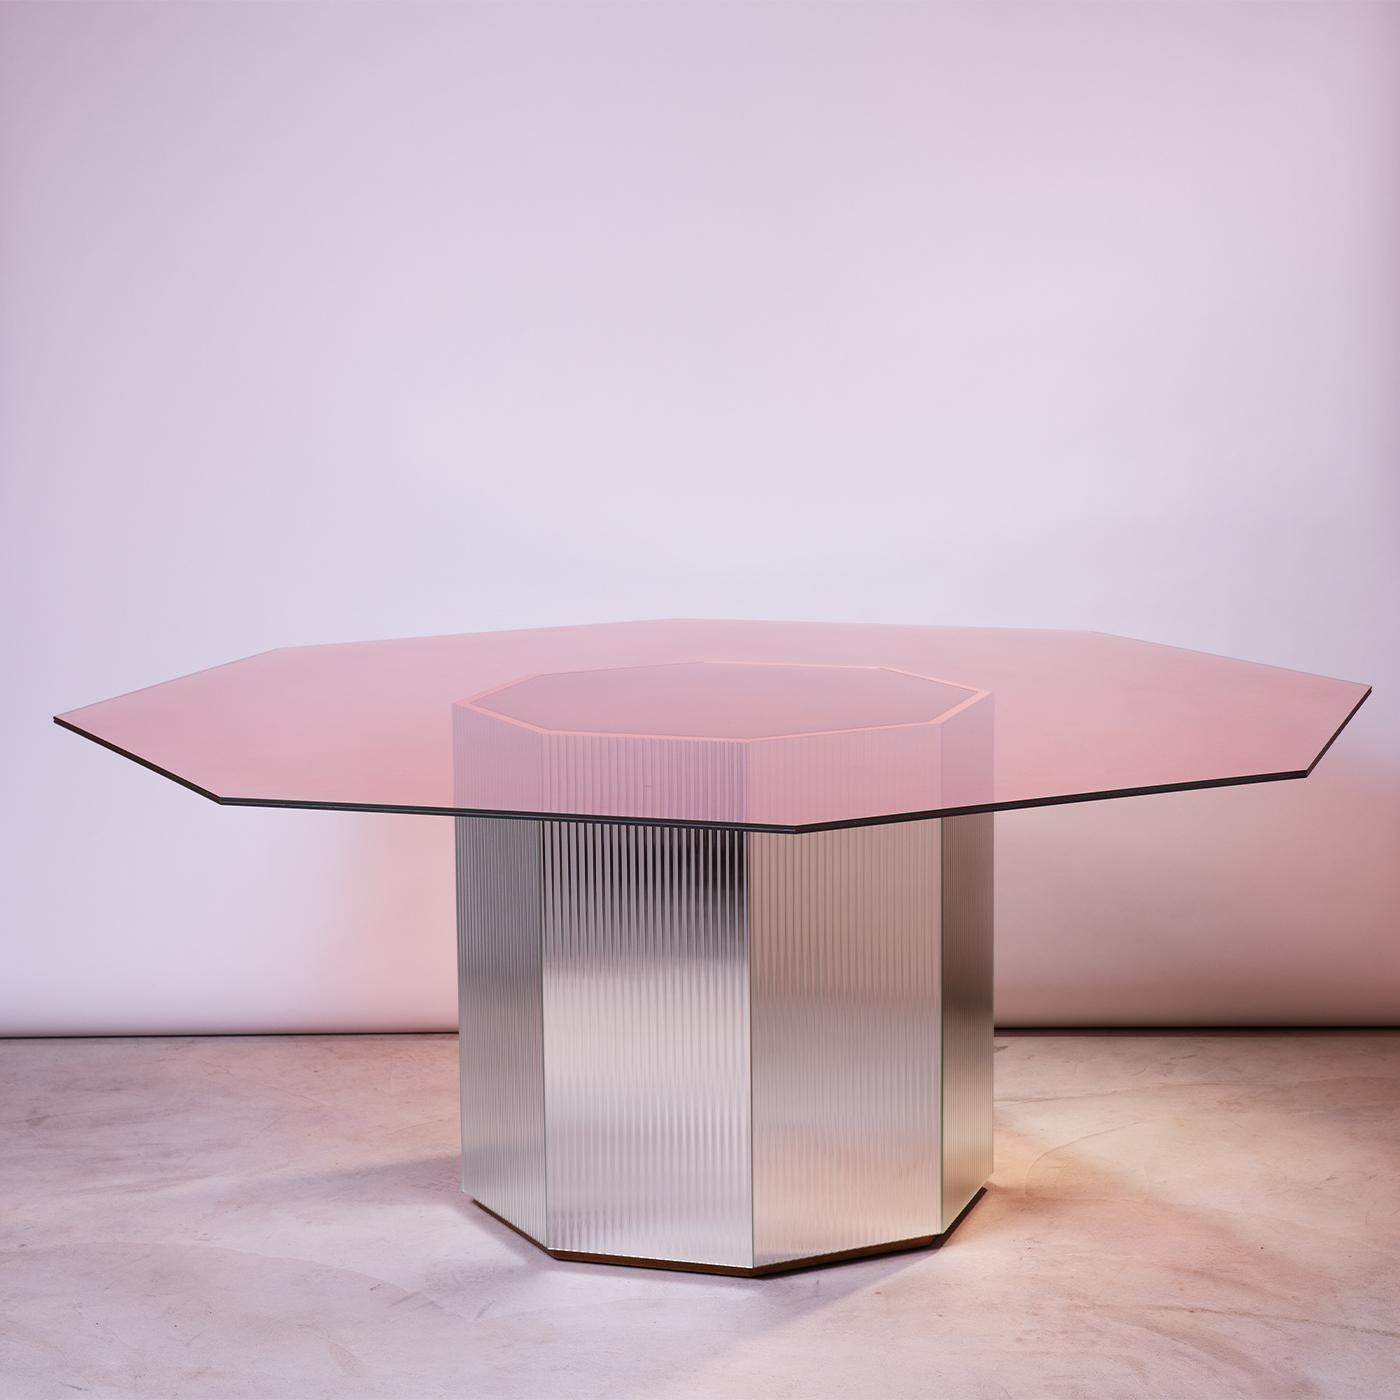 An exclusive table that will infuse a charming touch to a modern dining or family room decor, Sandra e Raimondo 140 showcases shimmering panels on its fluted glass covered wood, octagonal base, and hollow center. Topped by an irregular, octagonal